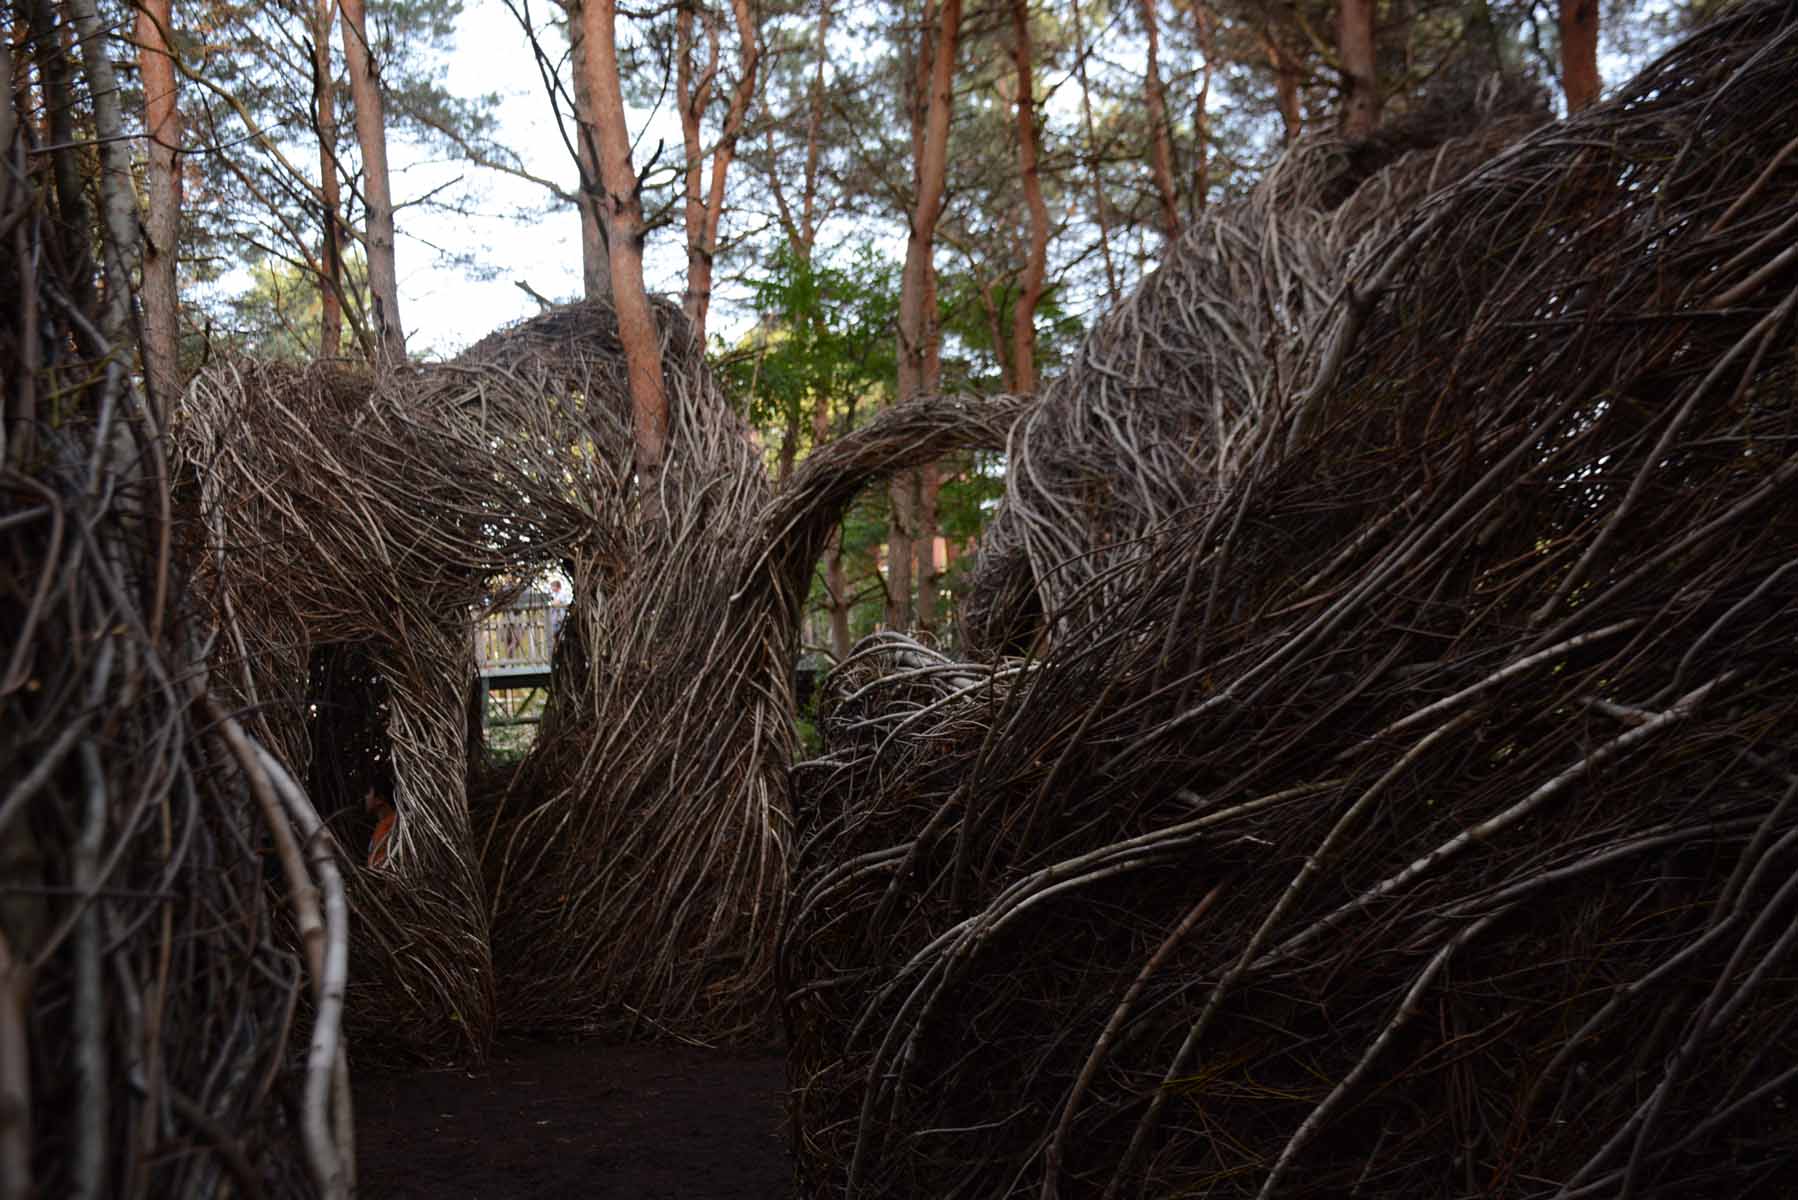 Interior view of Patrick Dougherty's work "Hopscotch" at the Wild Center